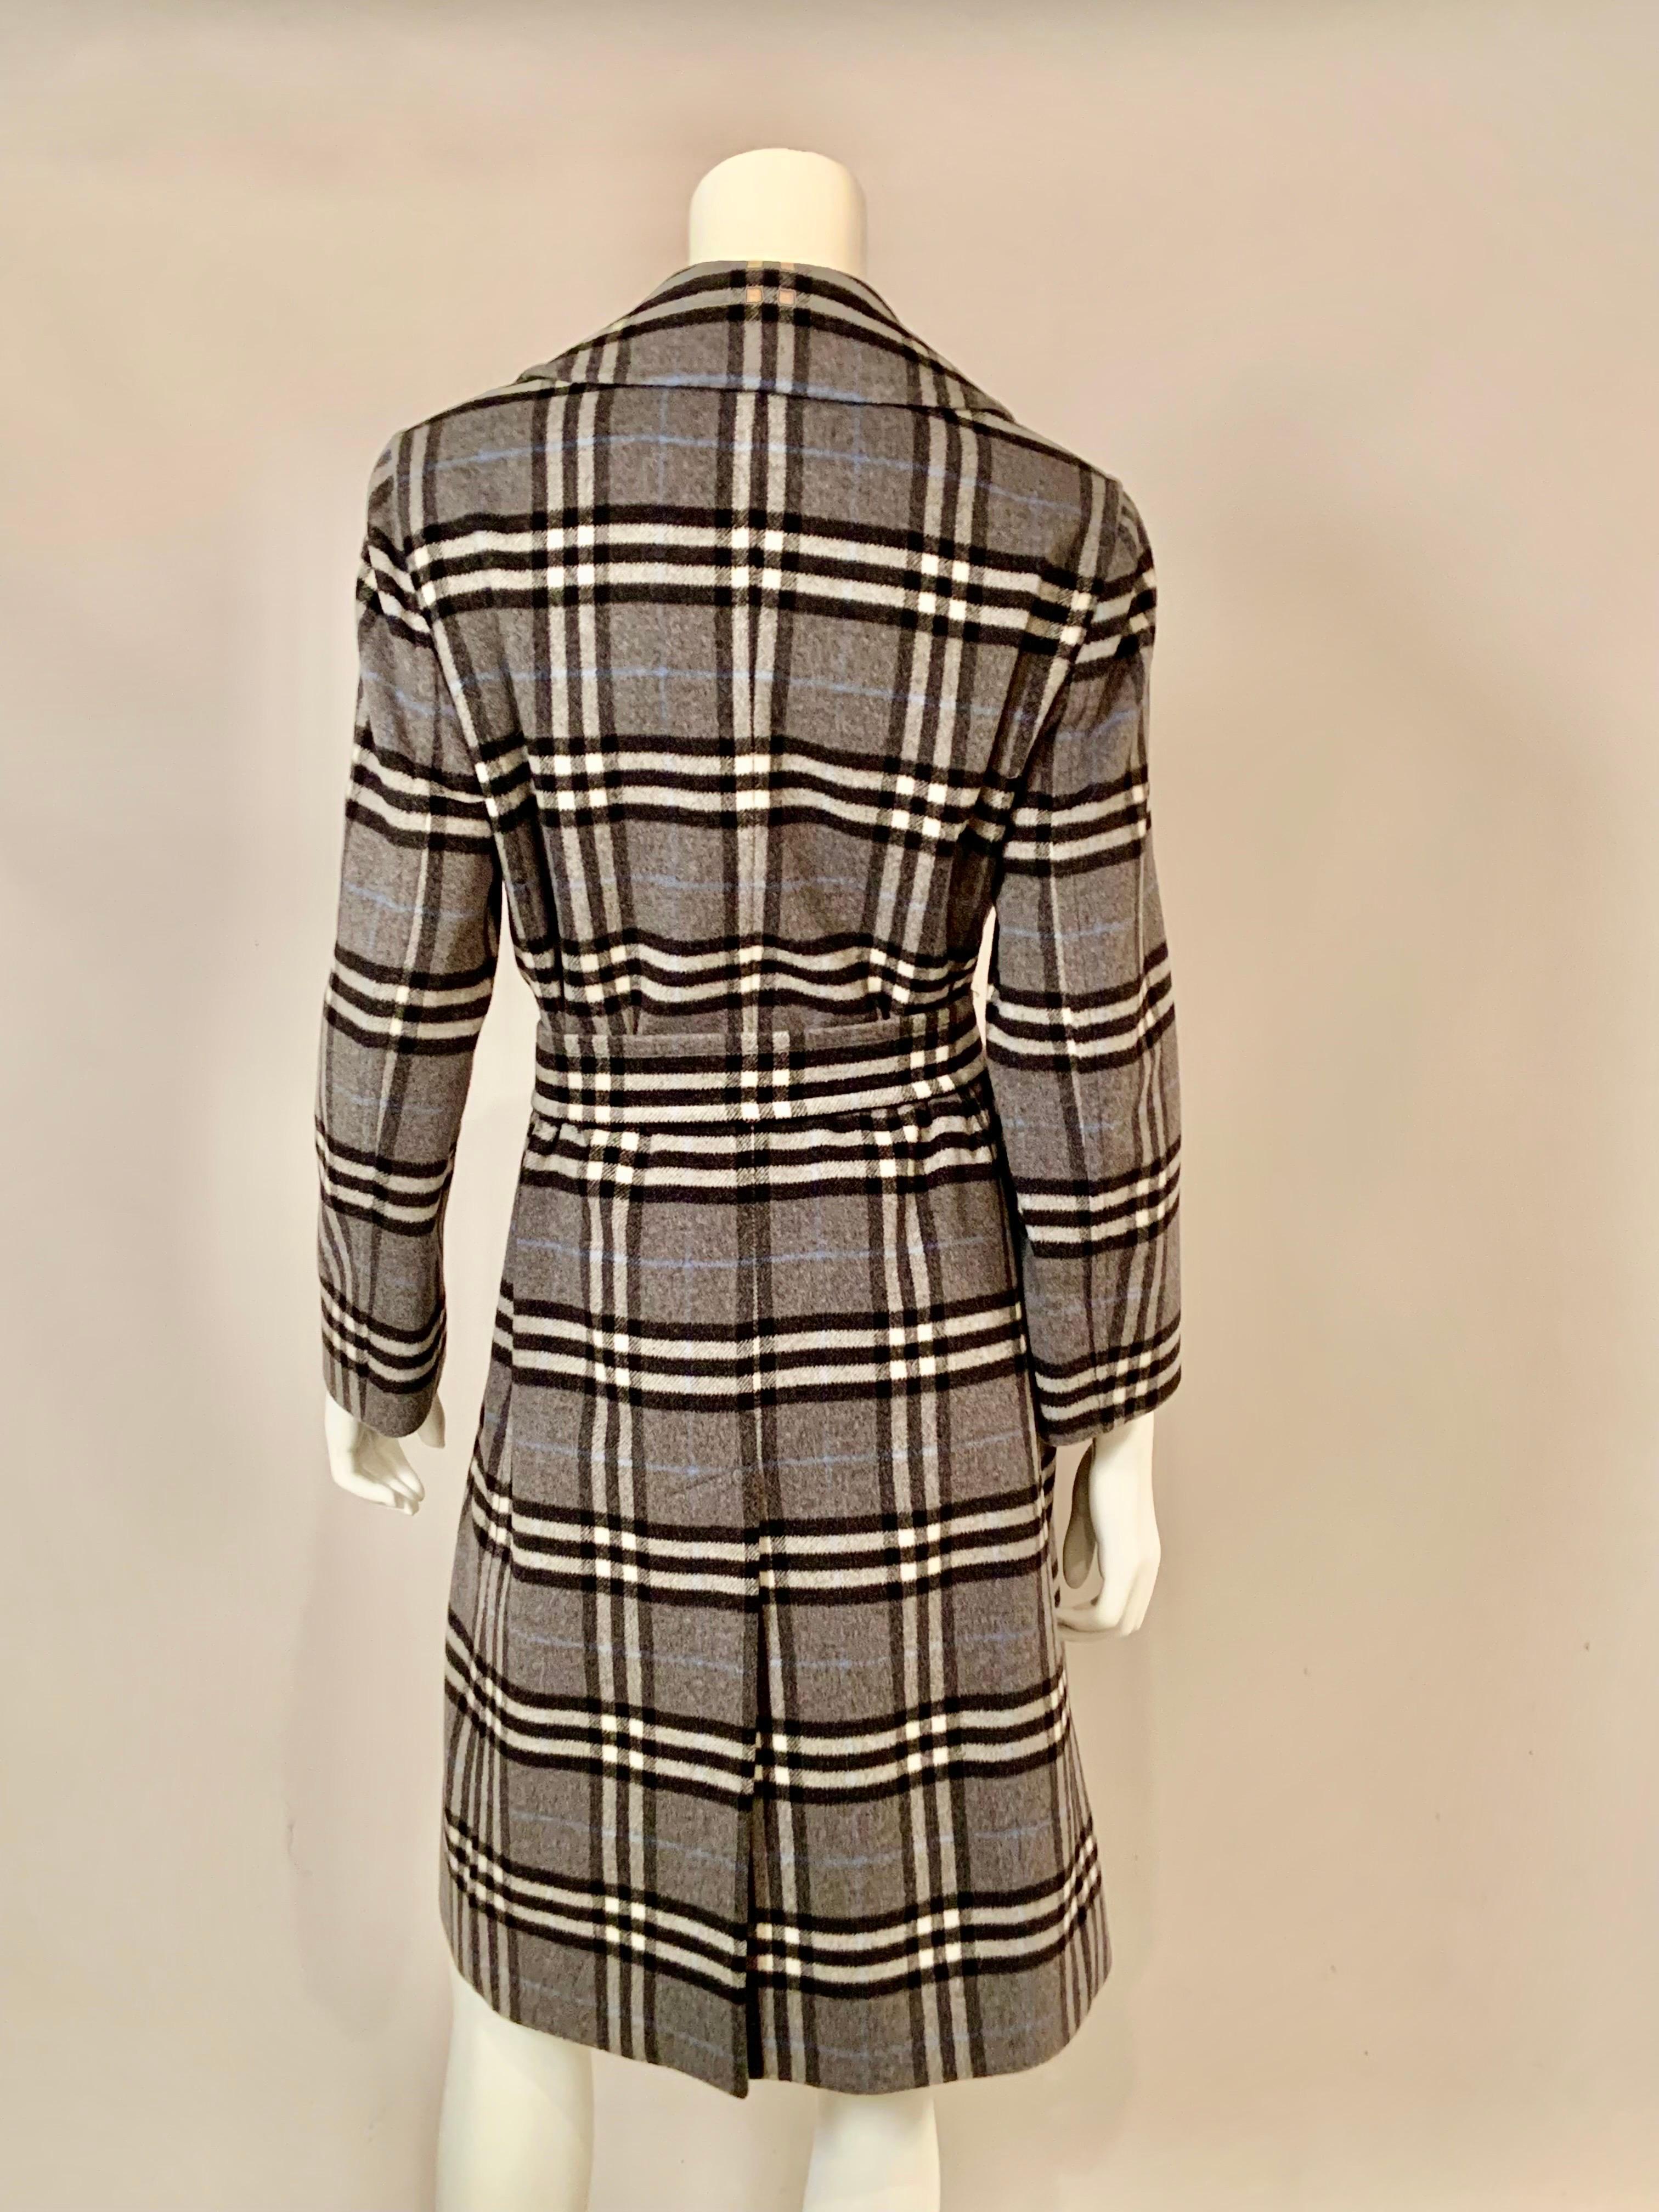 Burberry Plaid Cashmere and Wool Blend Coat and Belt For Sale 2